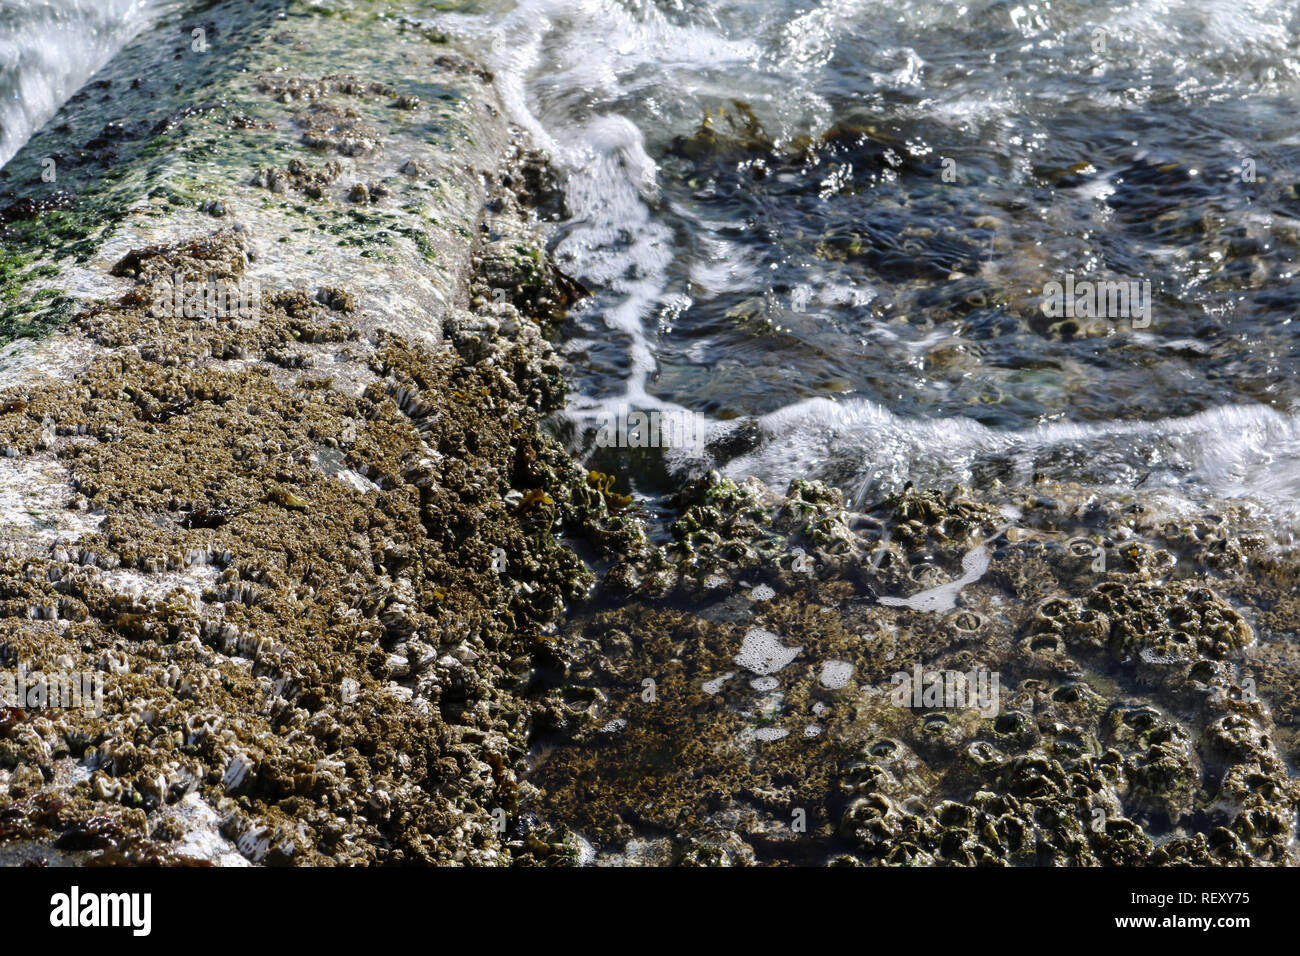 detail of Alki beach stairs covered in barnacles at high tide with a wave of water washing over the steps forming bubbles where it breaks Stock Photo